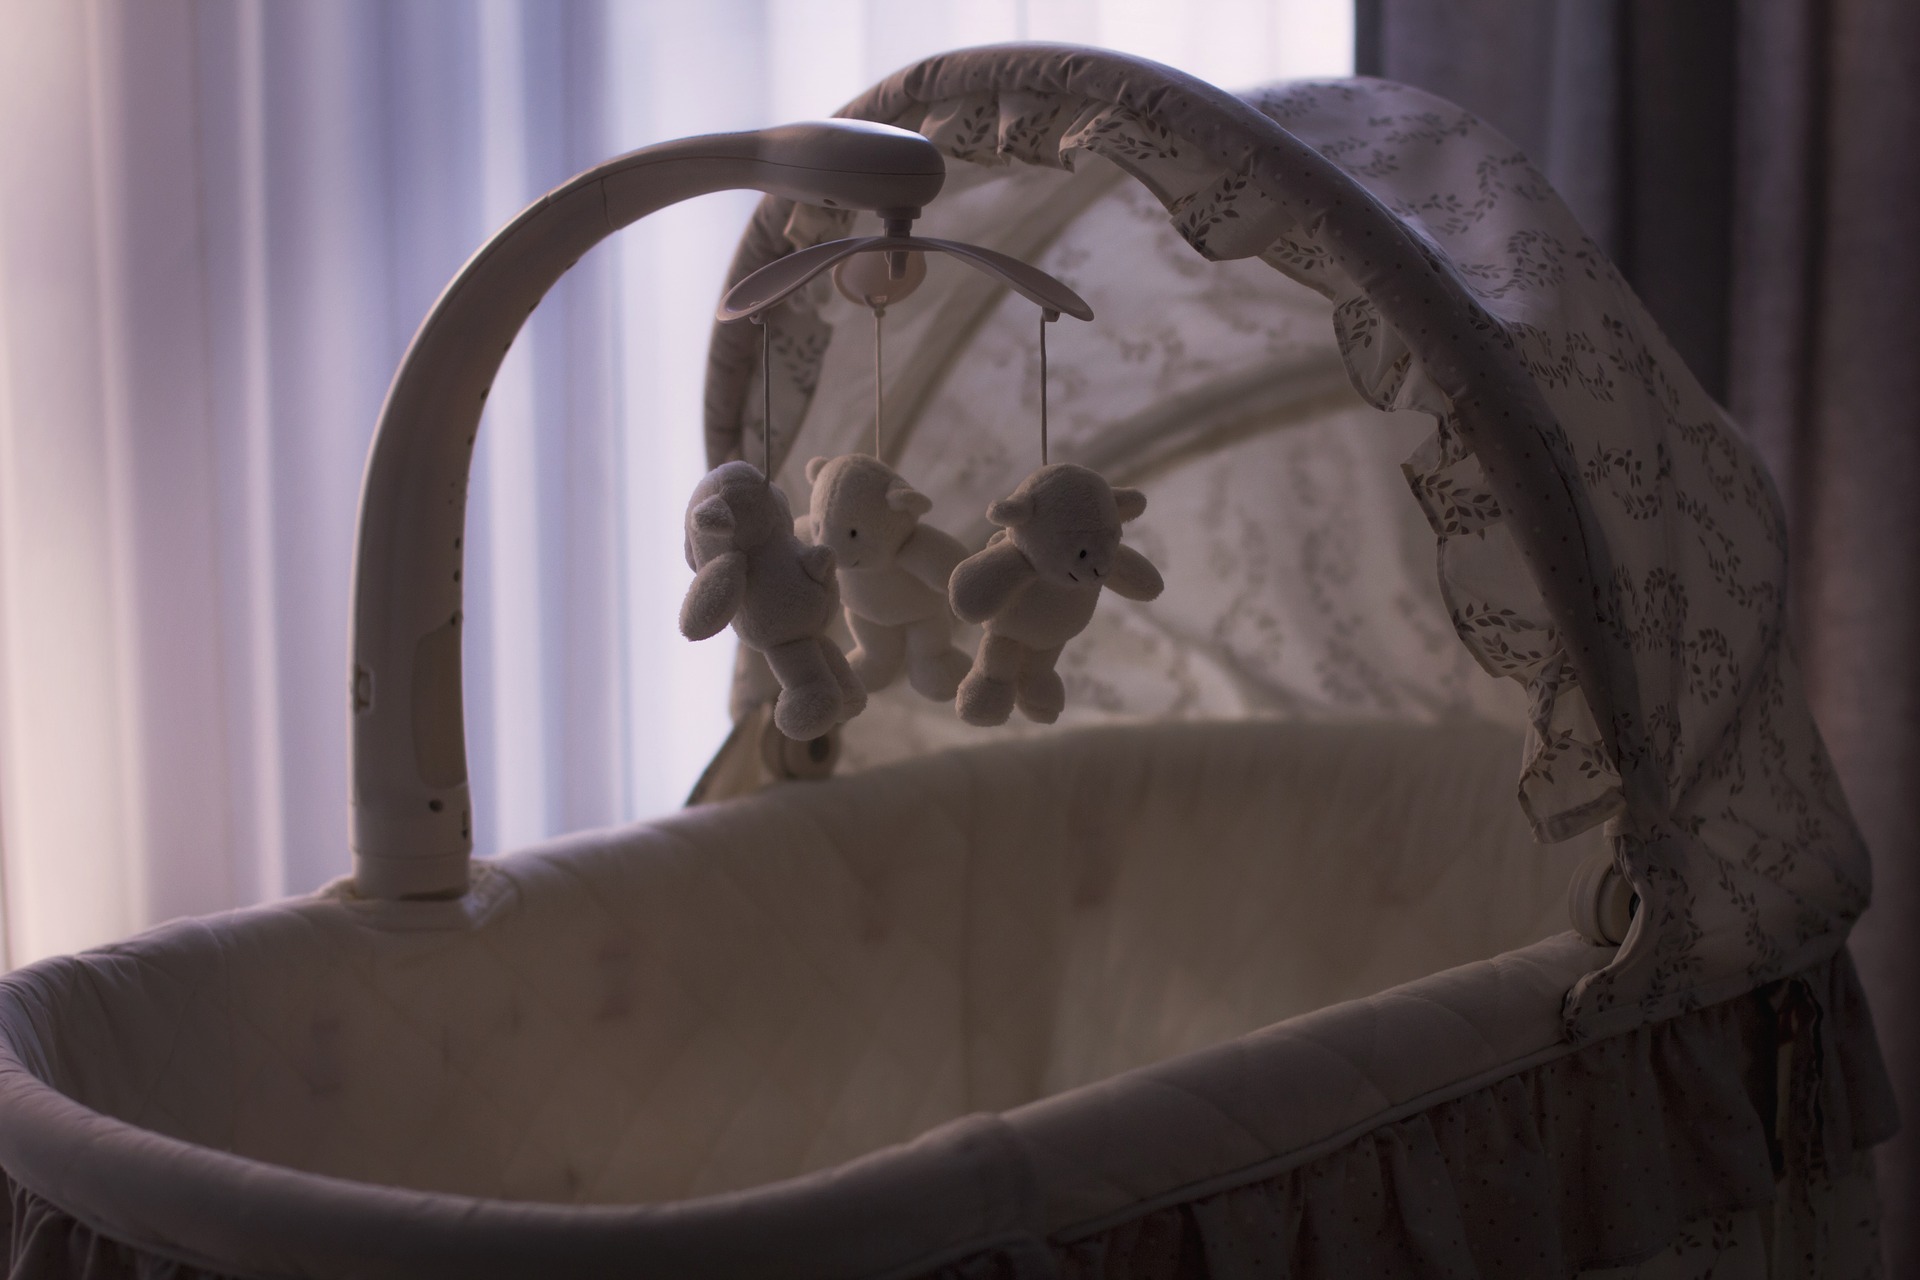 bassinet; babies need routine too